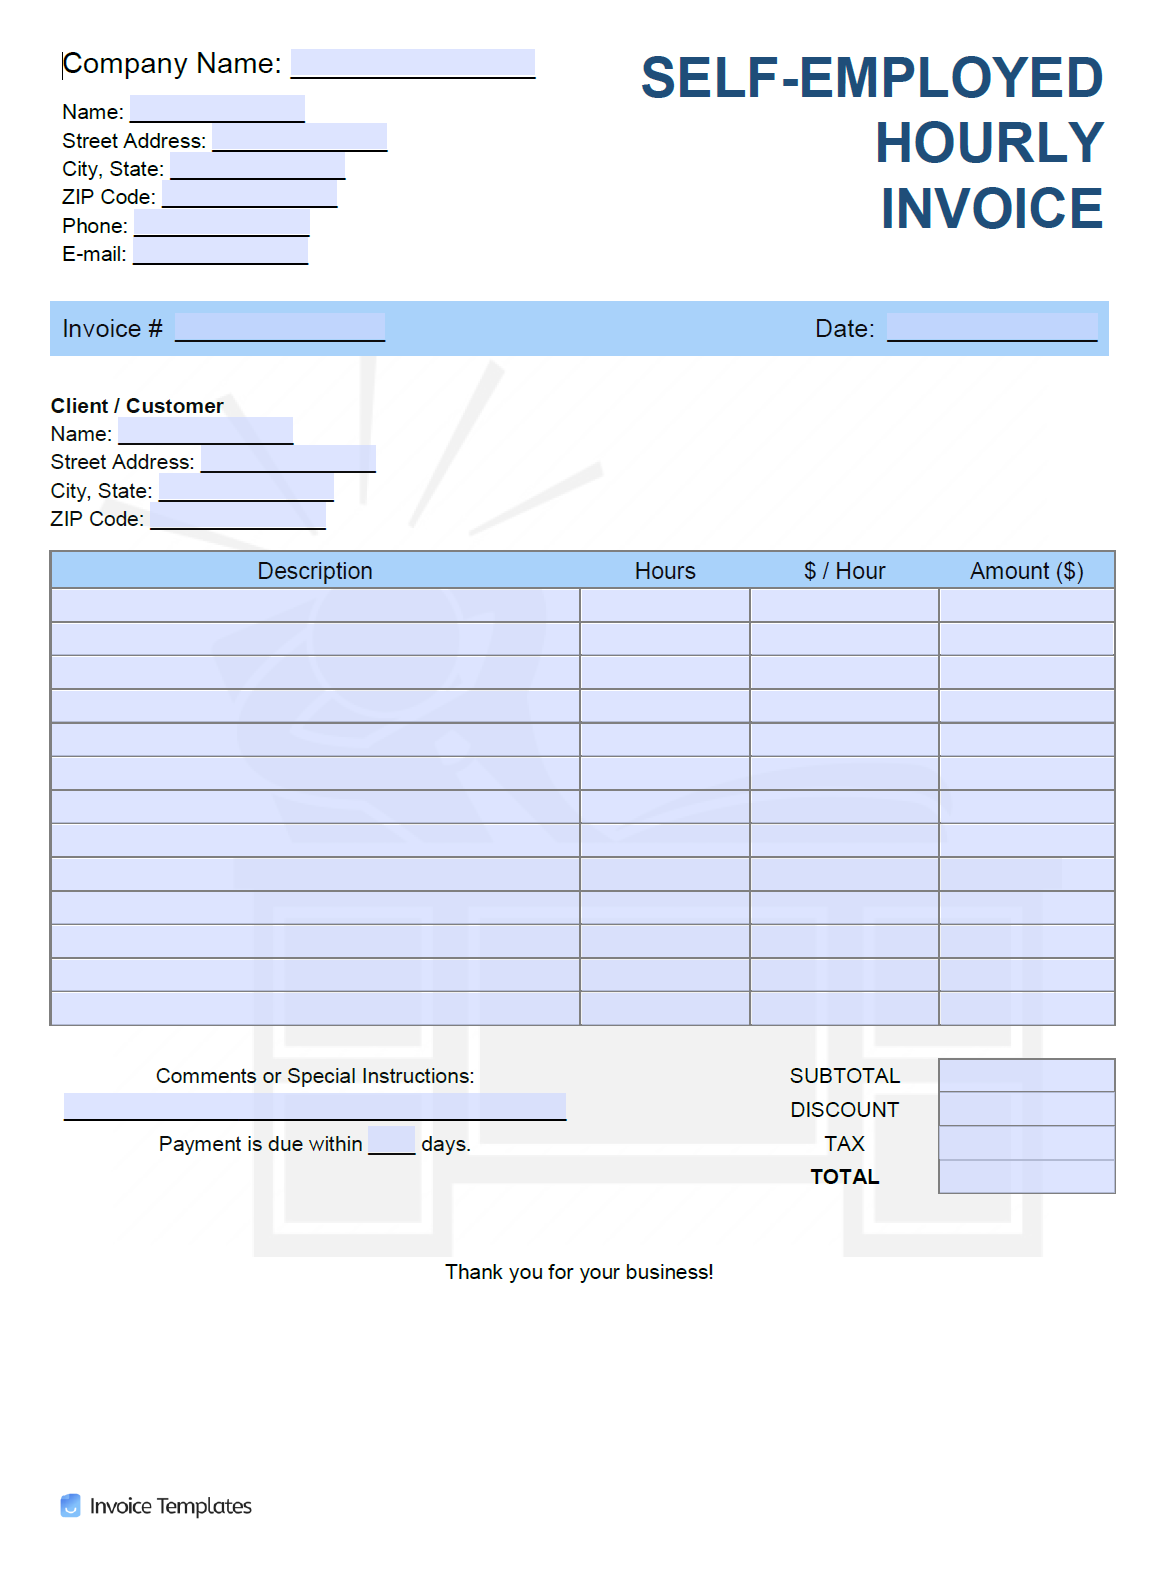 invoice-template-for-independent-contractor